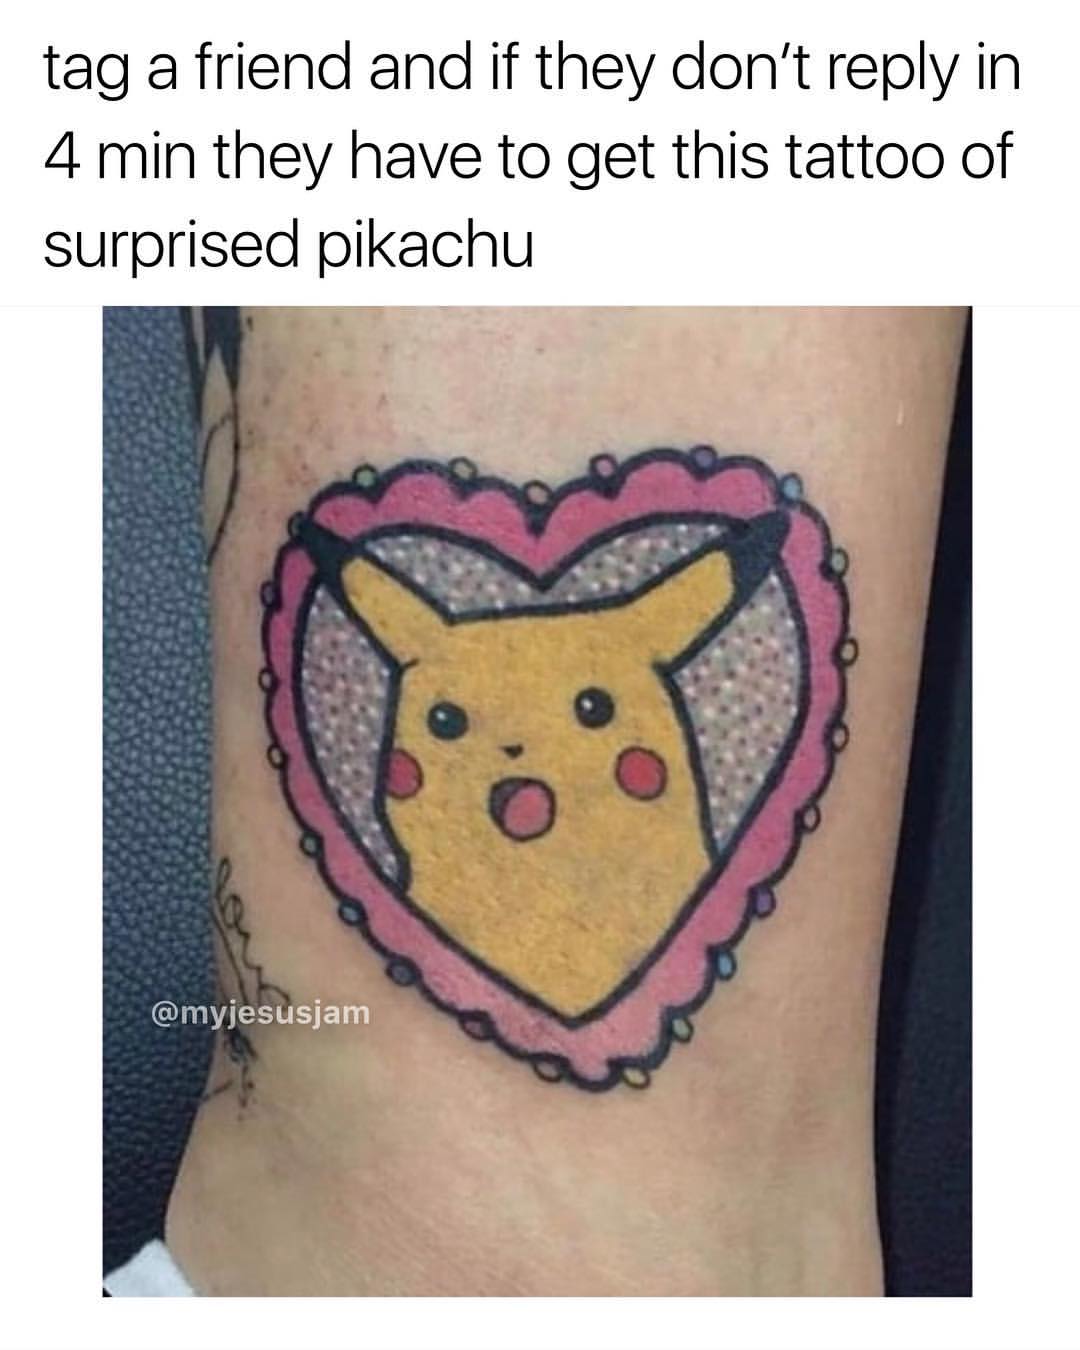 Tag a friend and if they don't reply in 4 min they have to get this tattoo of surprised pikachu.